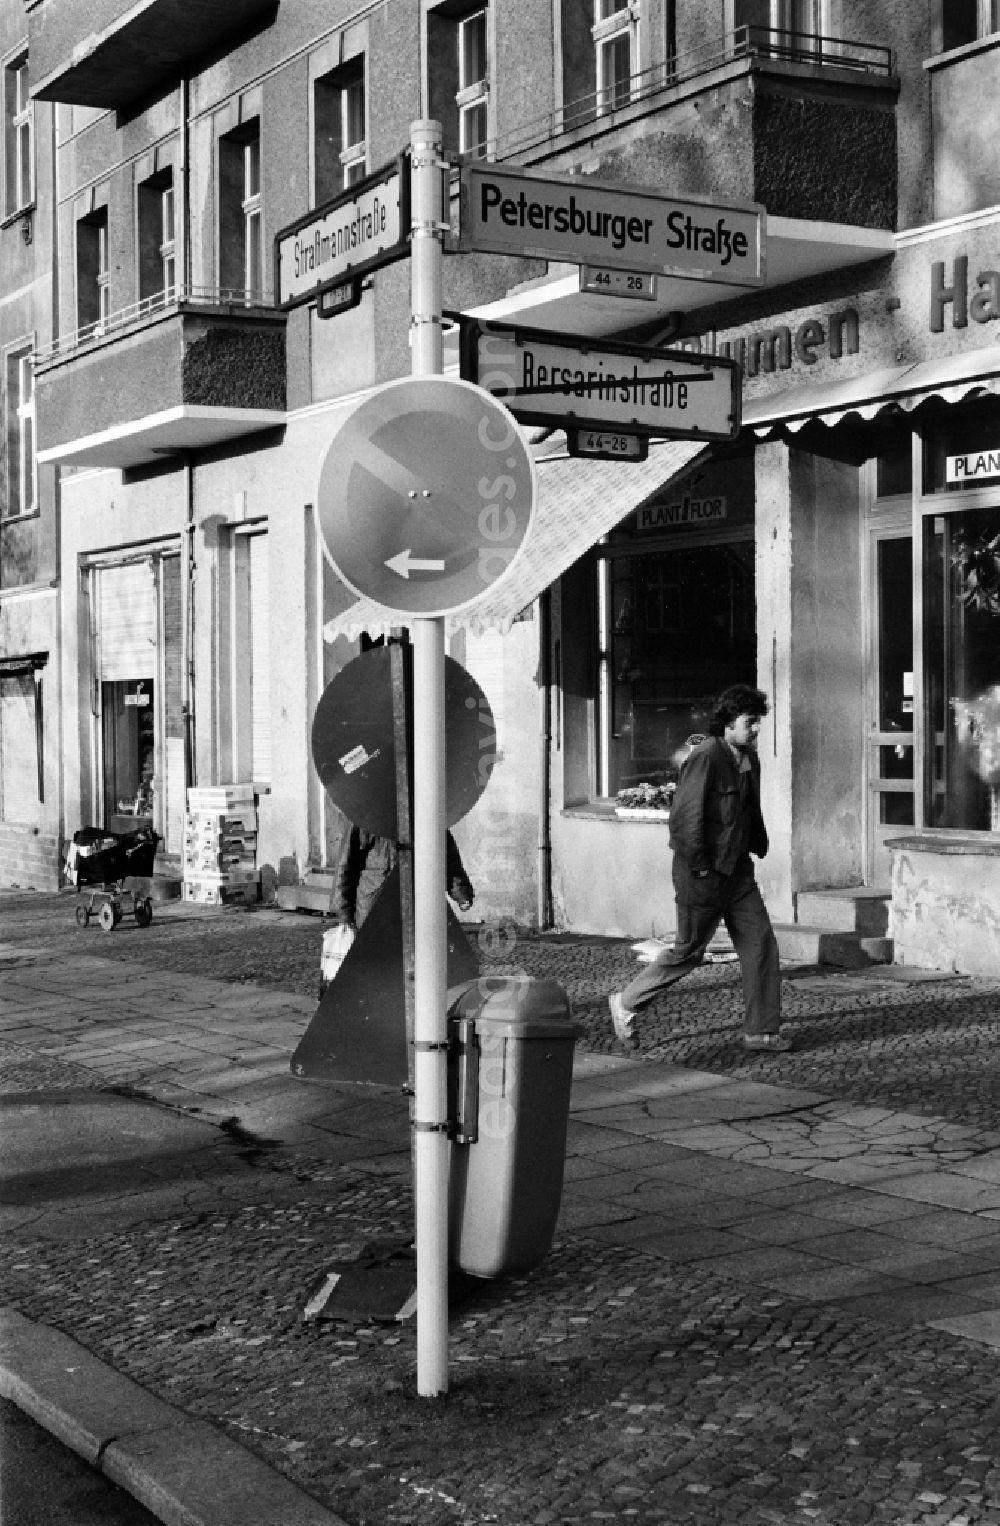 GDR image archive: Berlin - A new street sign shows the renaming of Bersarinstrasse in Petersburger Strasse on the corner Strassmannstrasse in Berlin - Friedrichshain, the former capital of the GDR, German Democratic Republic